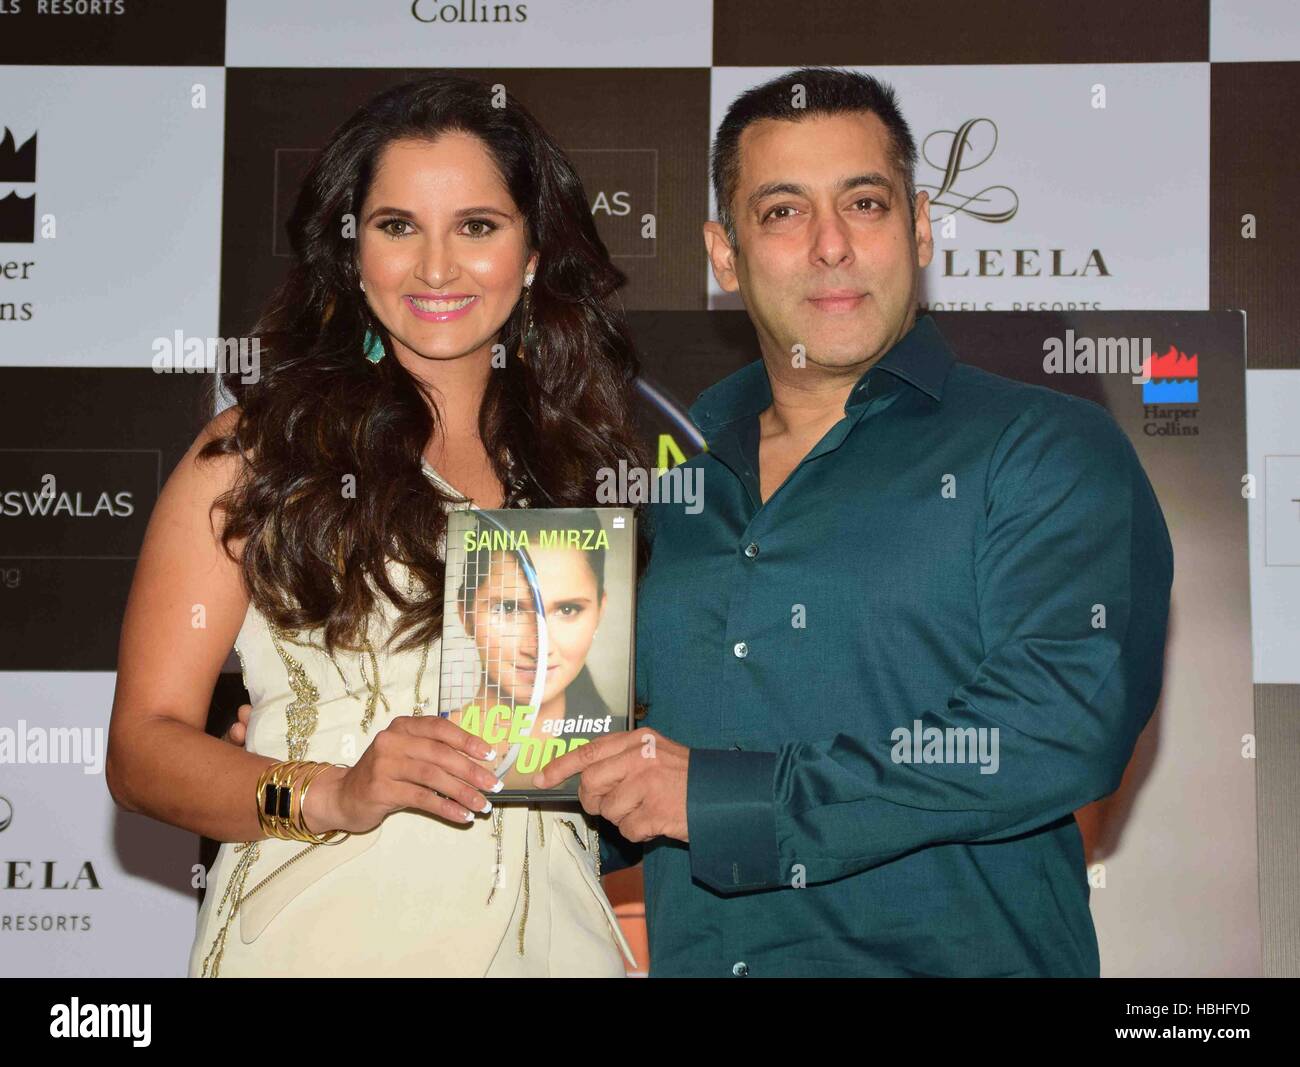 Sania Mirza, Indian professional tennis player, with Salman Khan, Indian actor, at release of autobiography ‘Ace Against Odds' in Bombay, Mumbai, Maharashtra, India, Asia Stock Photo